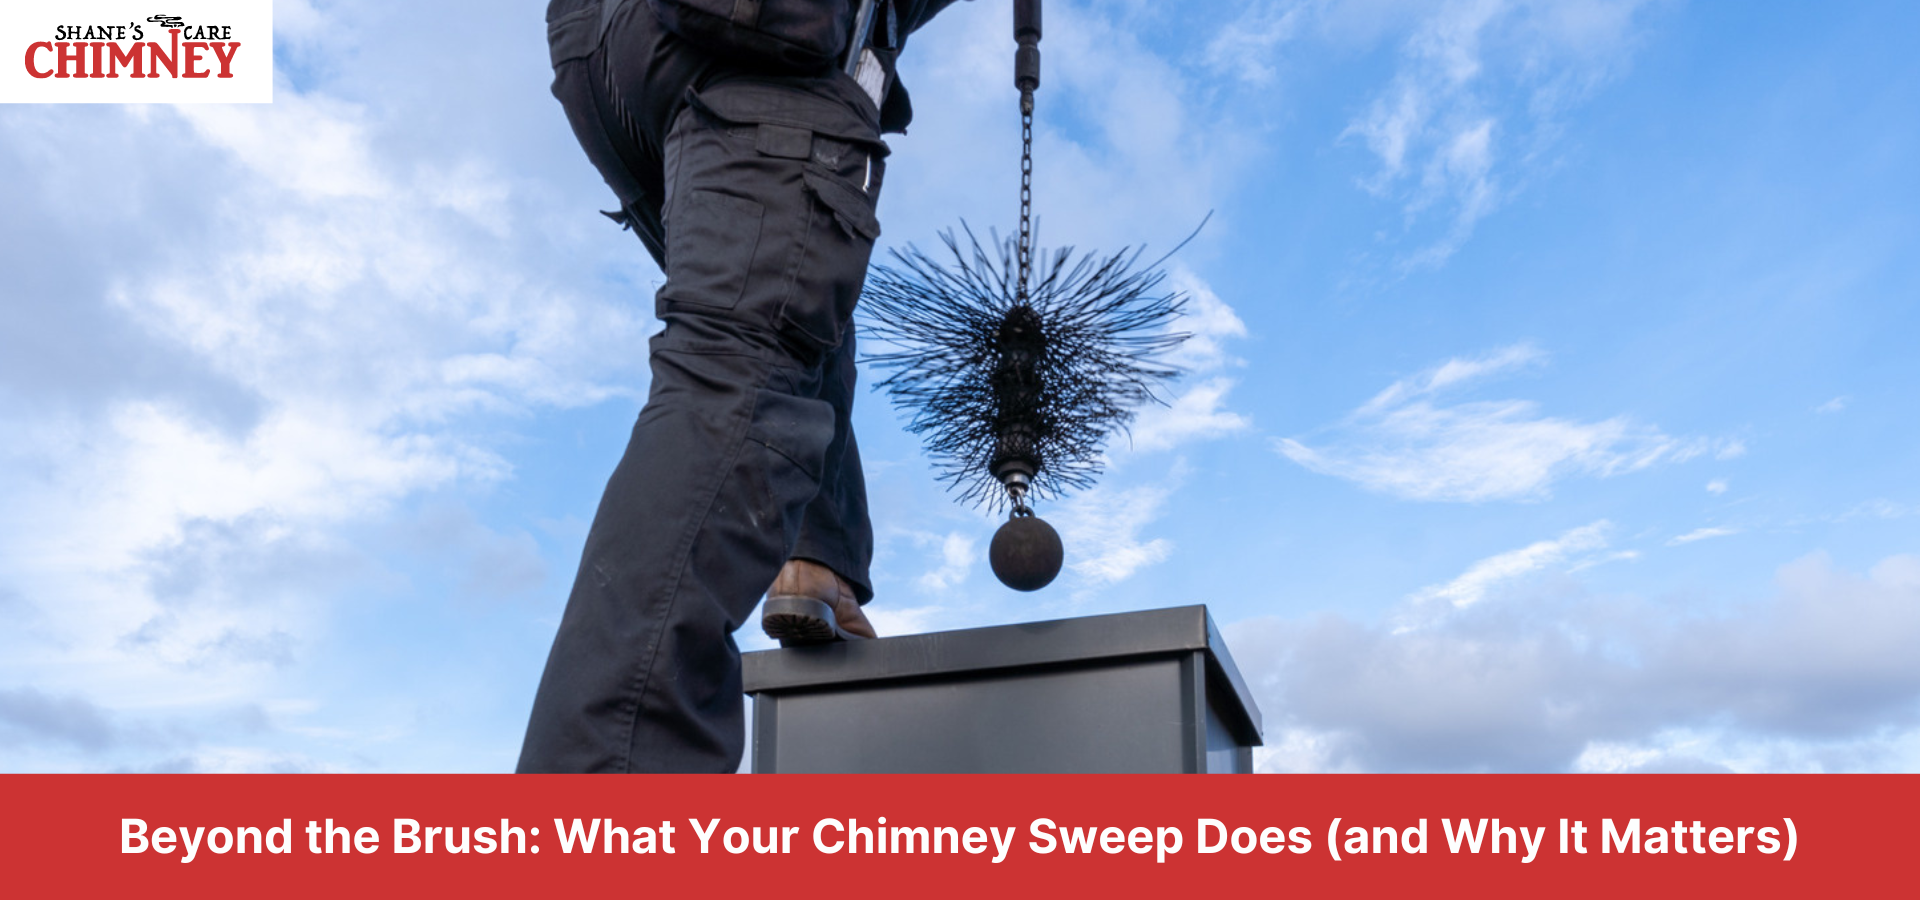 Featured image for “Beyond the Brush: What Your Chimney Sweep Does (and Why It Matters)”